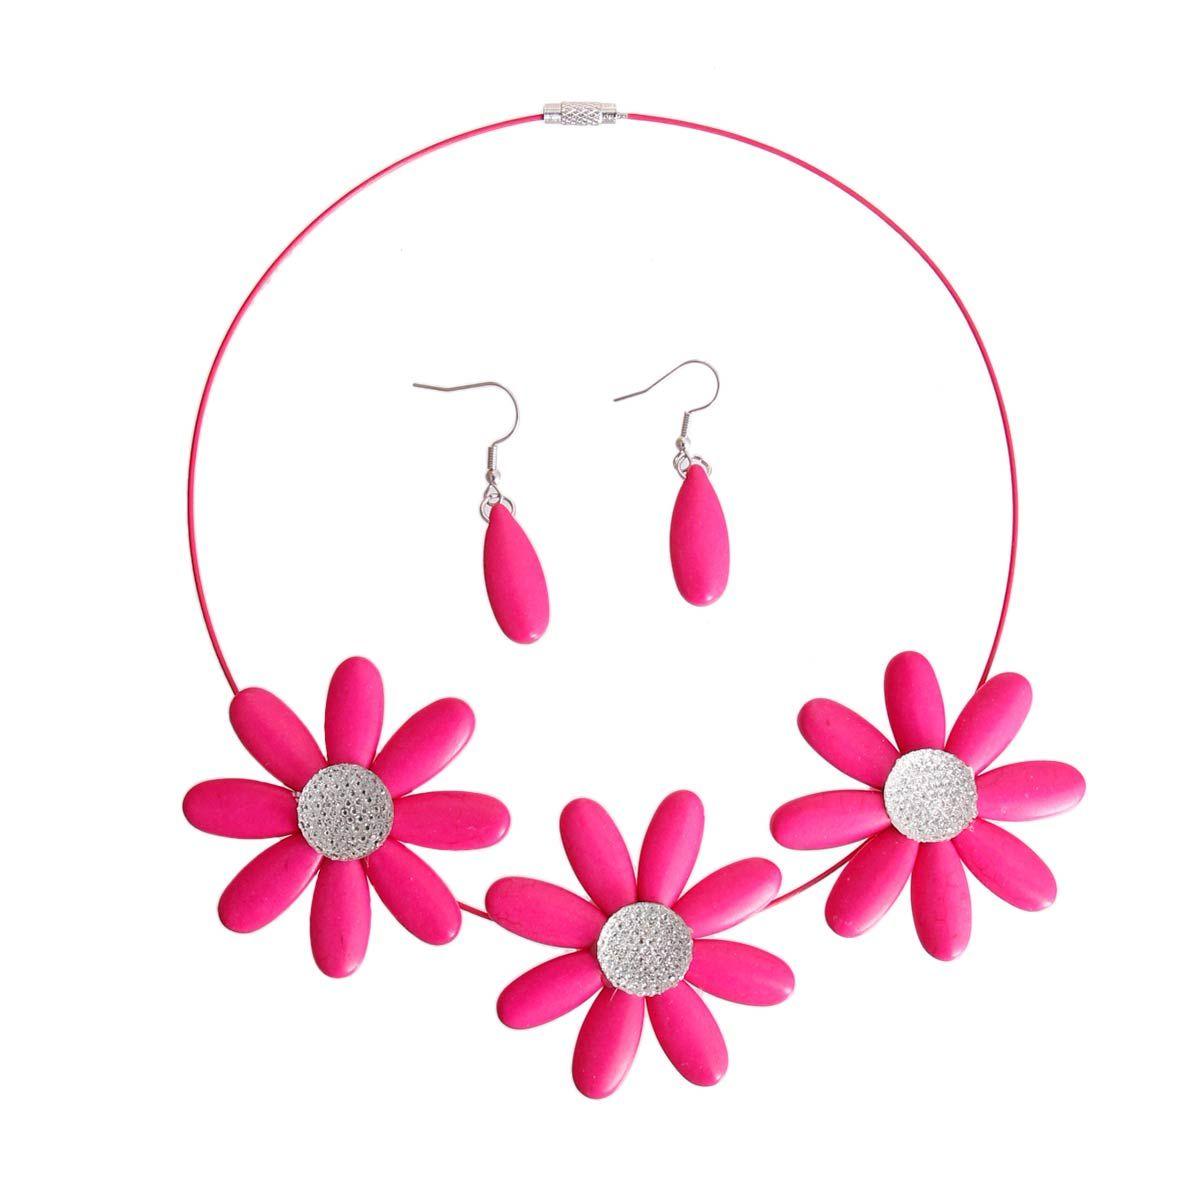 Buy Pink Daisy Necklace Set - Perfect Accessory for Summer